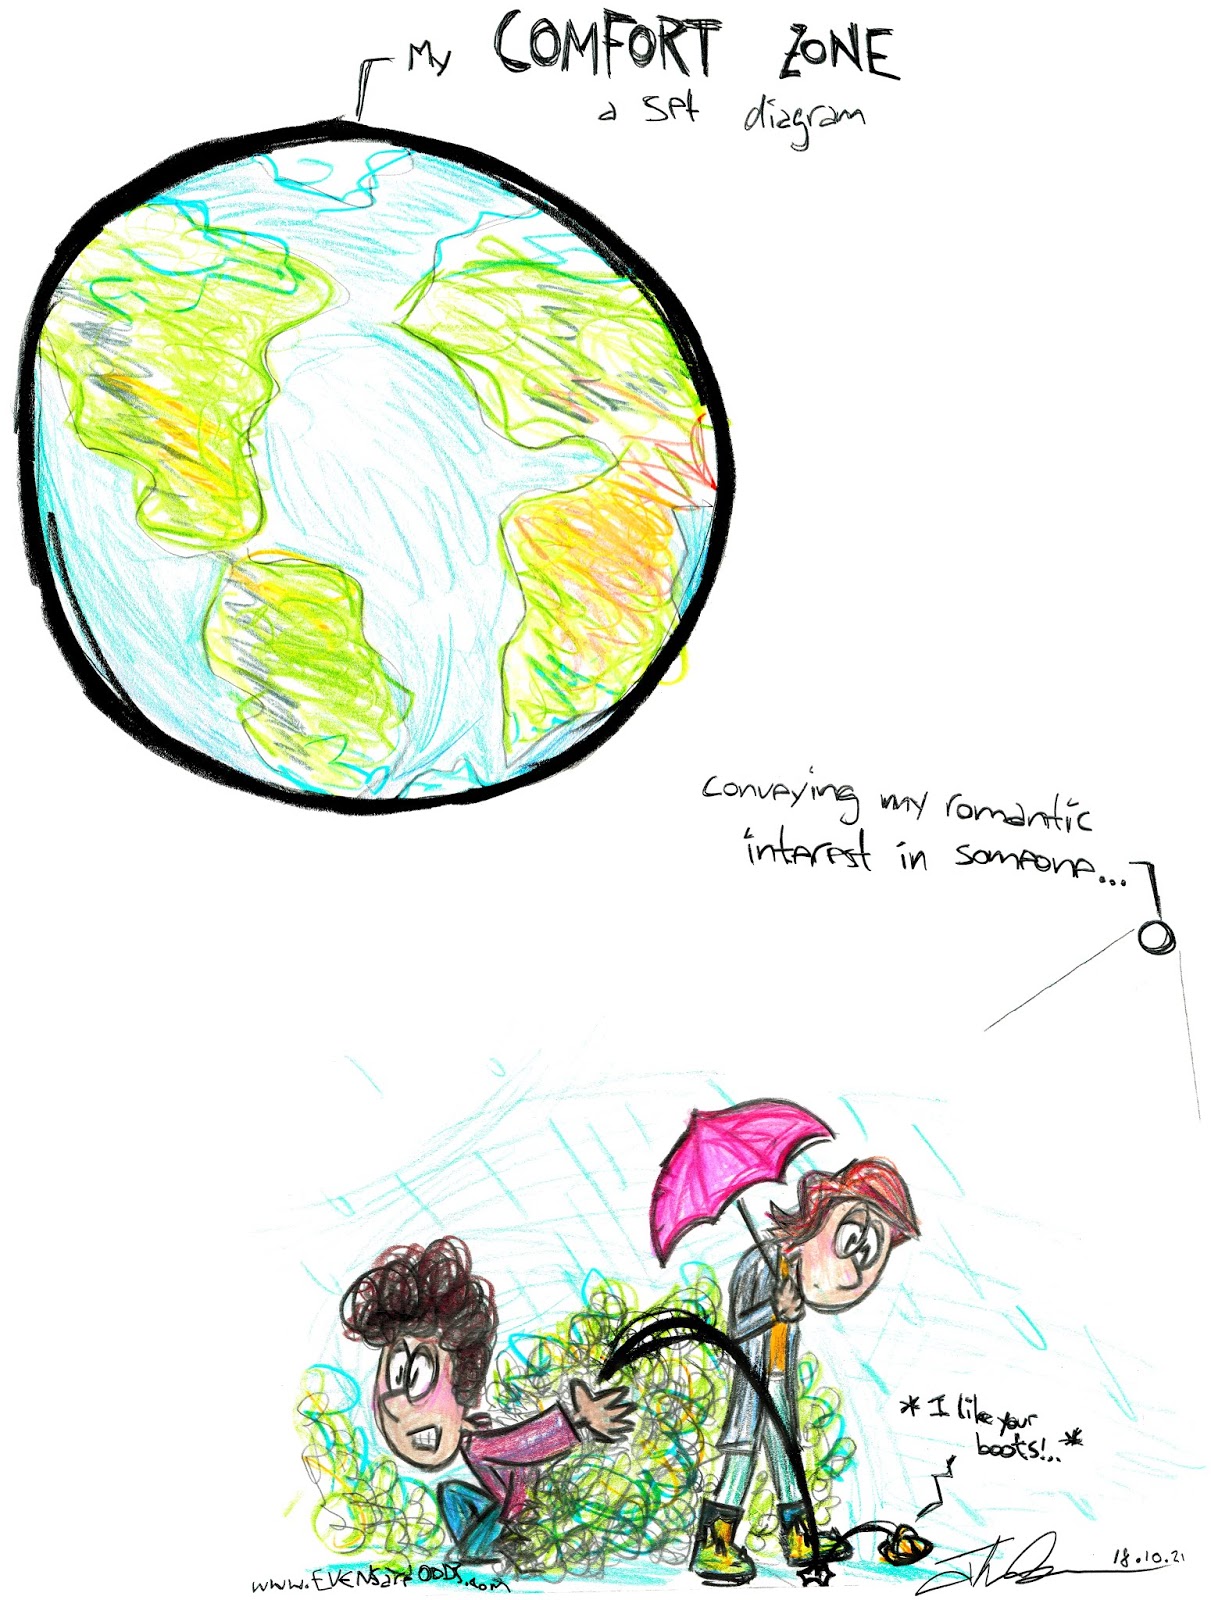 "My Comfort Zone: a set diagram" *leader pointing to the ENTIRE GLOBE*  vs  "Conveying my romantic interest in someone" *a highly perturbed Teddy, hiding behind a bush, tossing a crumpled note reading 'I like your boots' at a somewhat miffed Allison, donned in dinosaurs rain boots & the red umbrella from Pixar's 'The Blue Umbrella'...* 